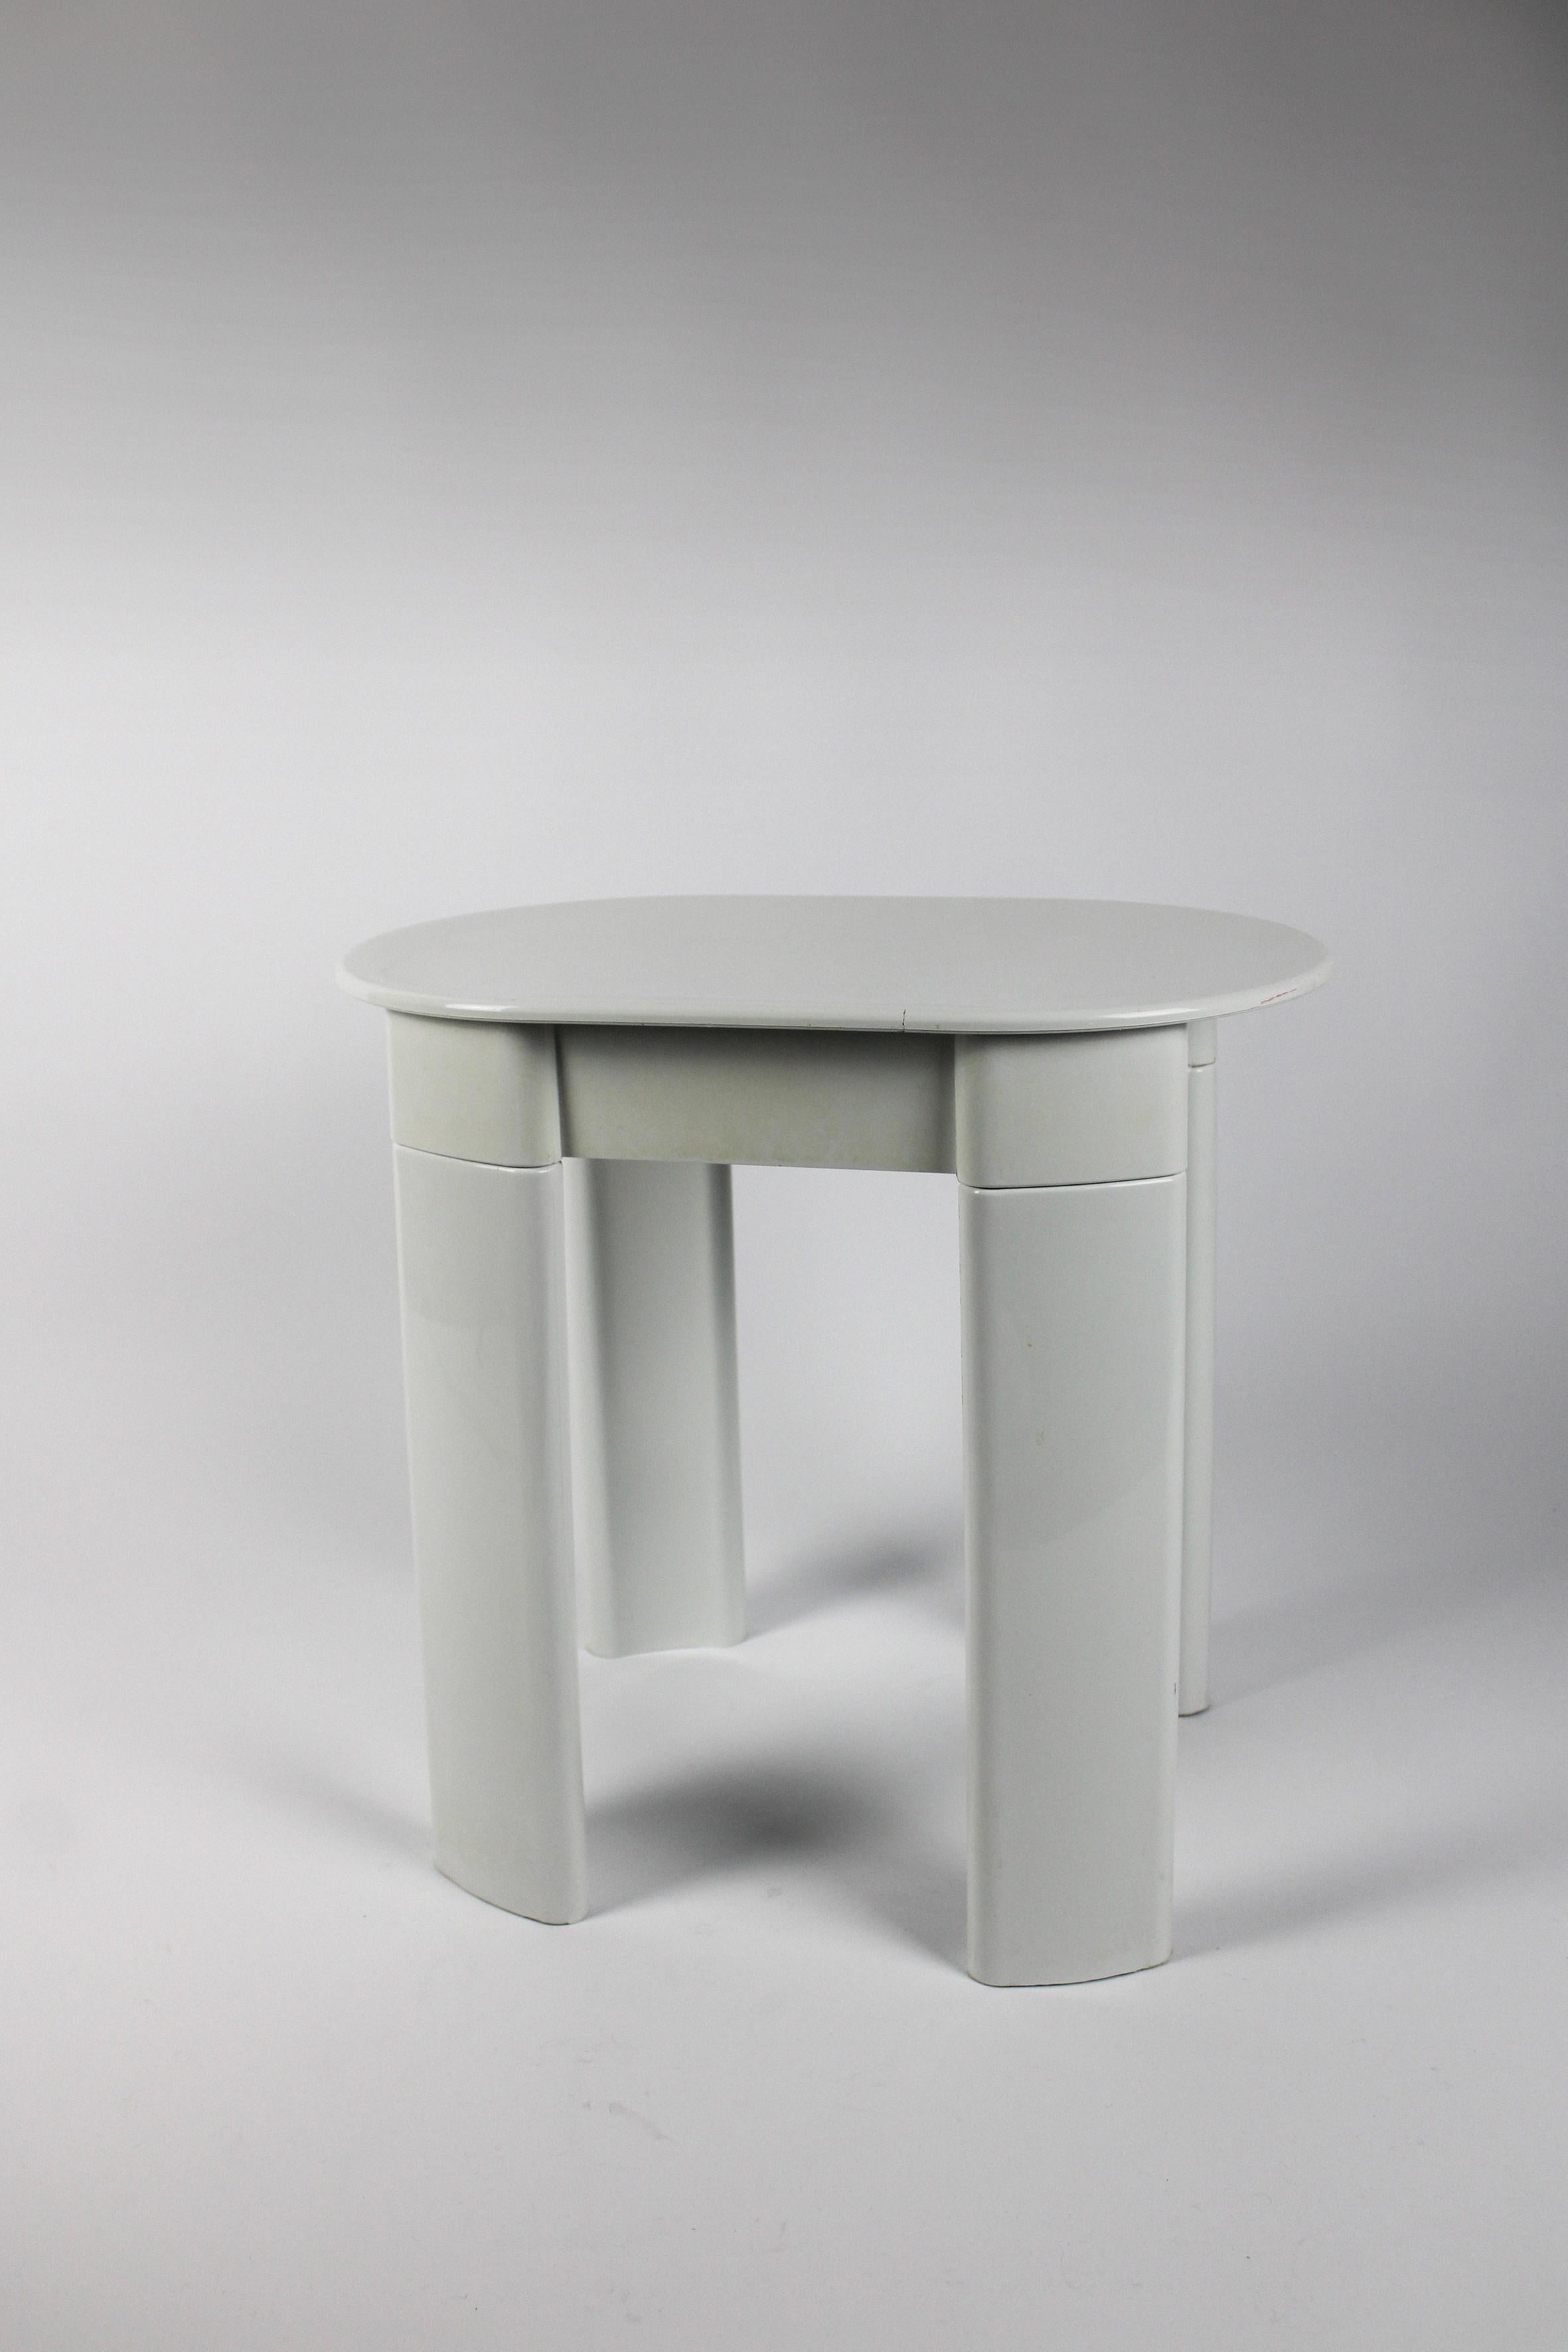 Late 20th Century Olaf Von Bohr Side Table Space Age Stool Gedy Plastic Italy 1970's For Sale